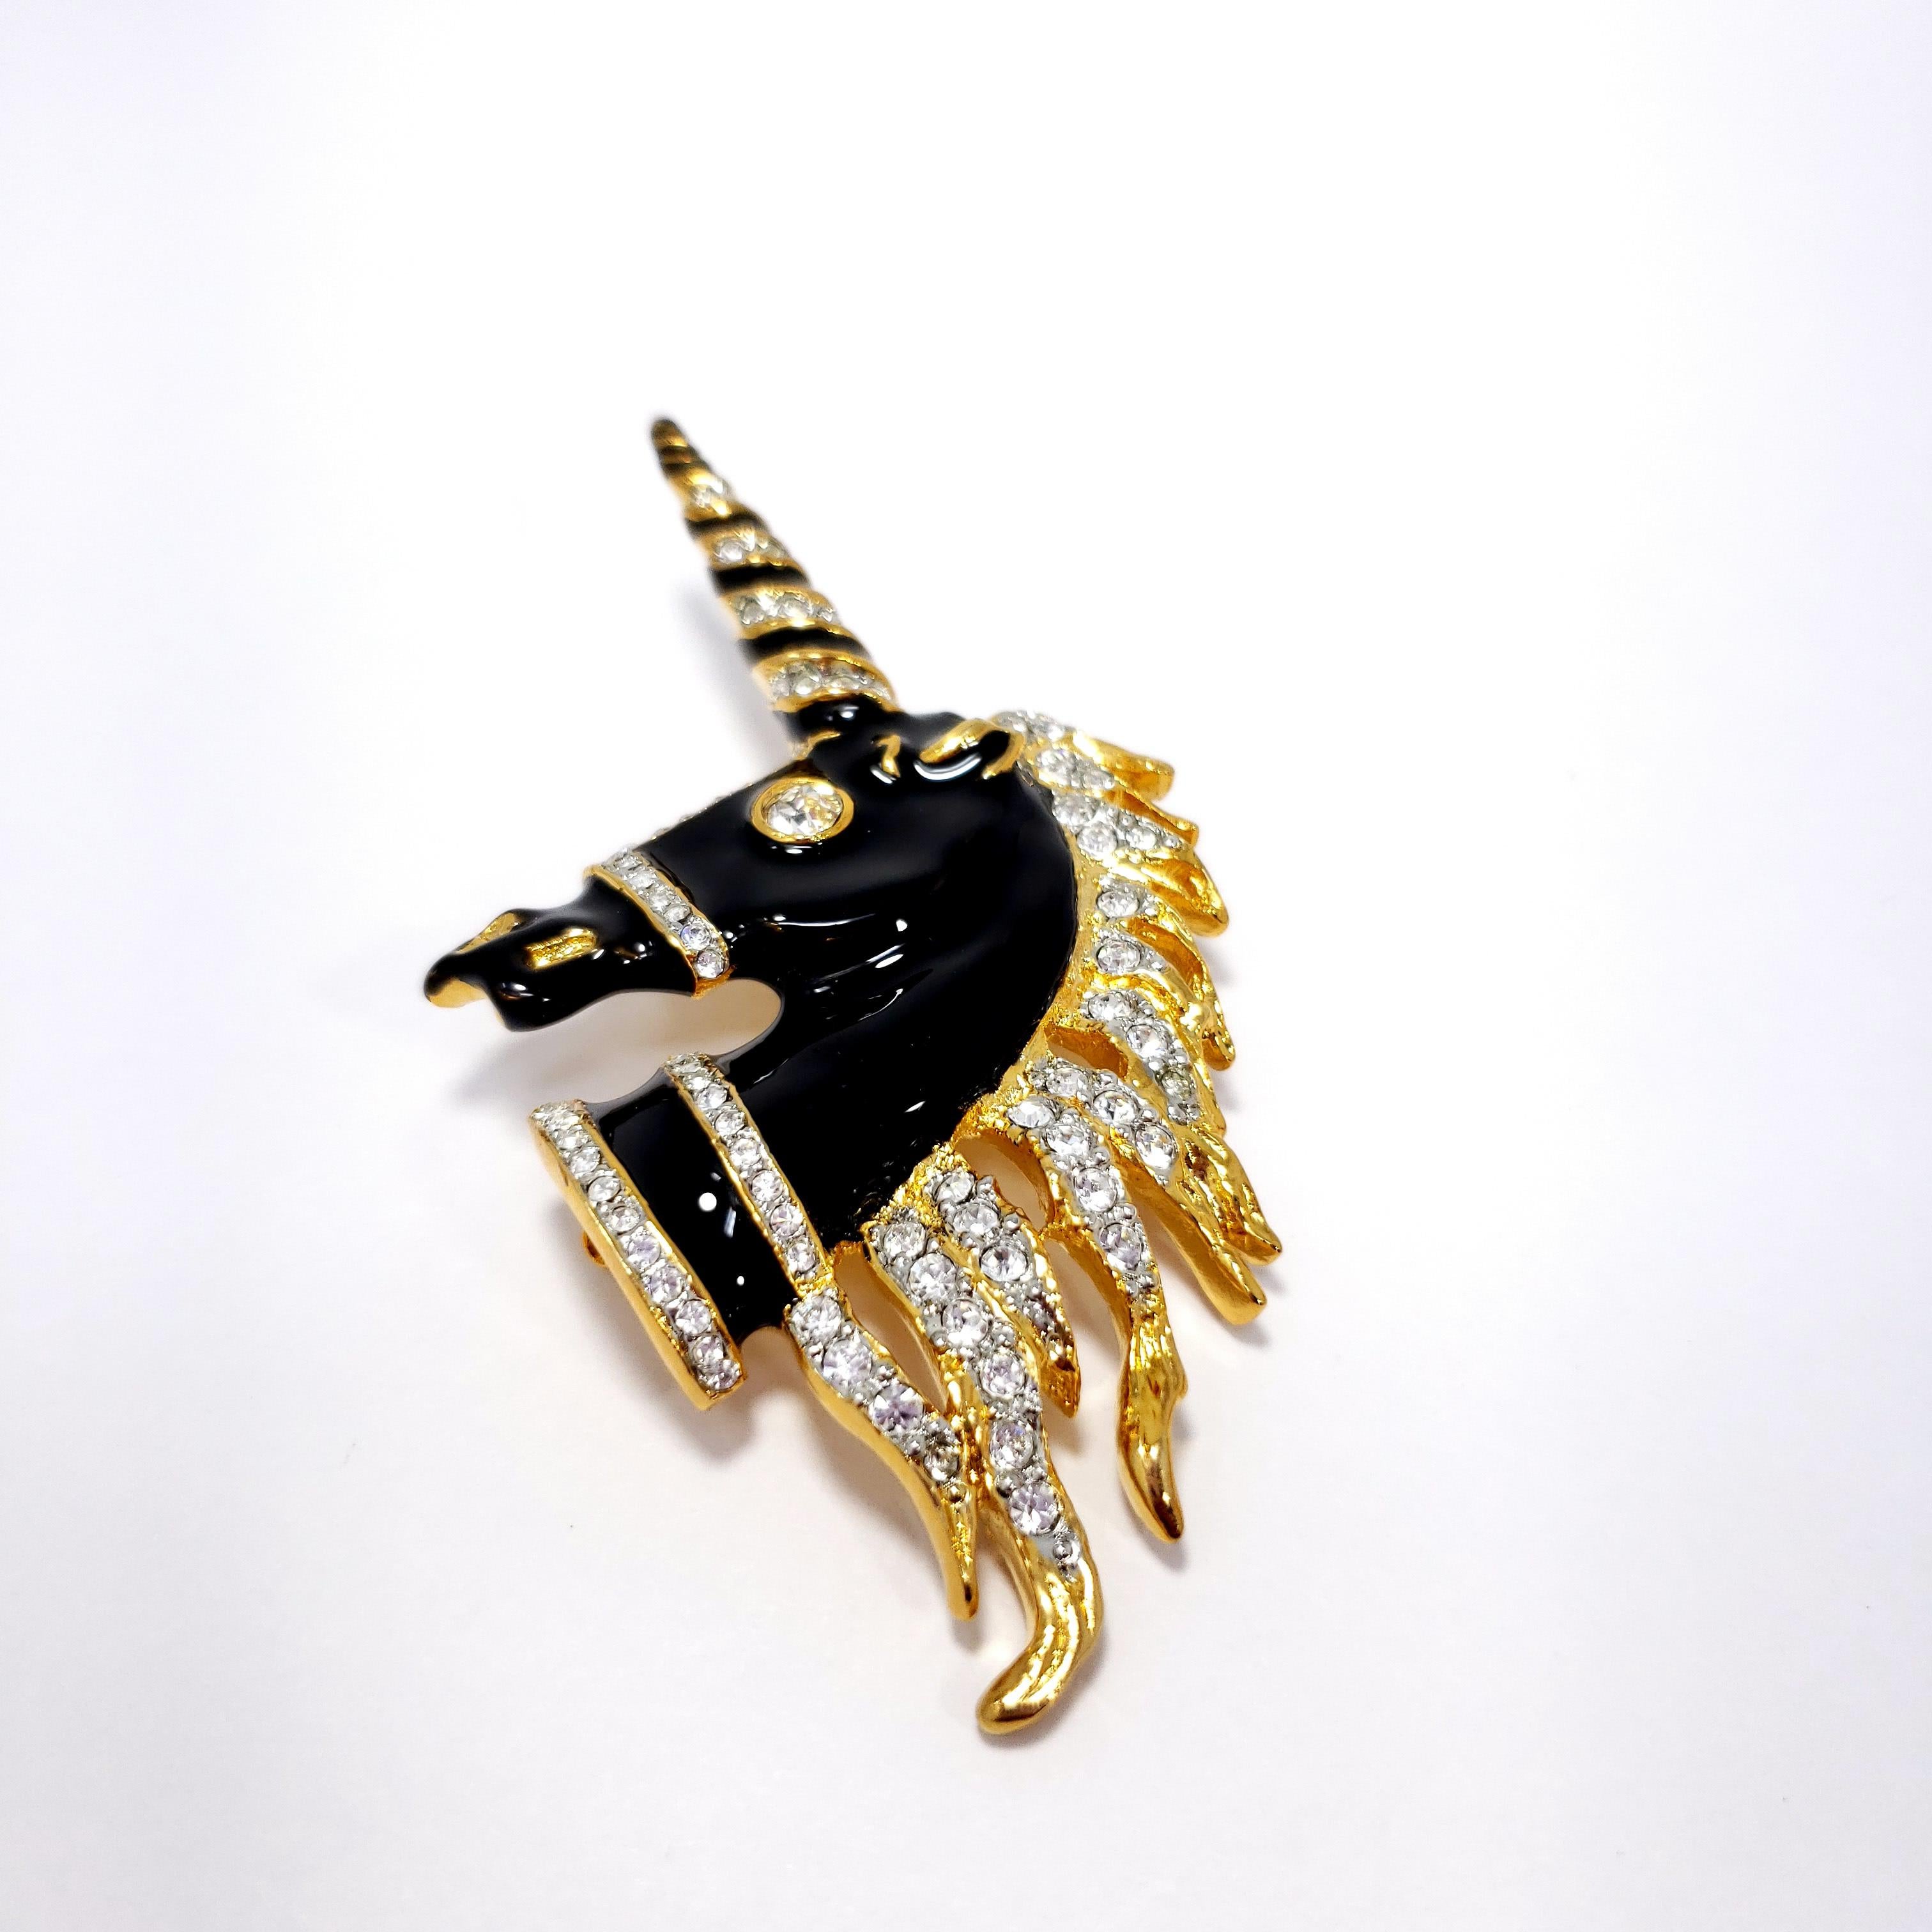 Clear crystals decorate this majestic black enamel golden unicorn pin brooch by Kenneth Jay Lane.

Hallmarks: Kenneth Lane